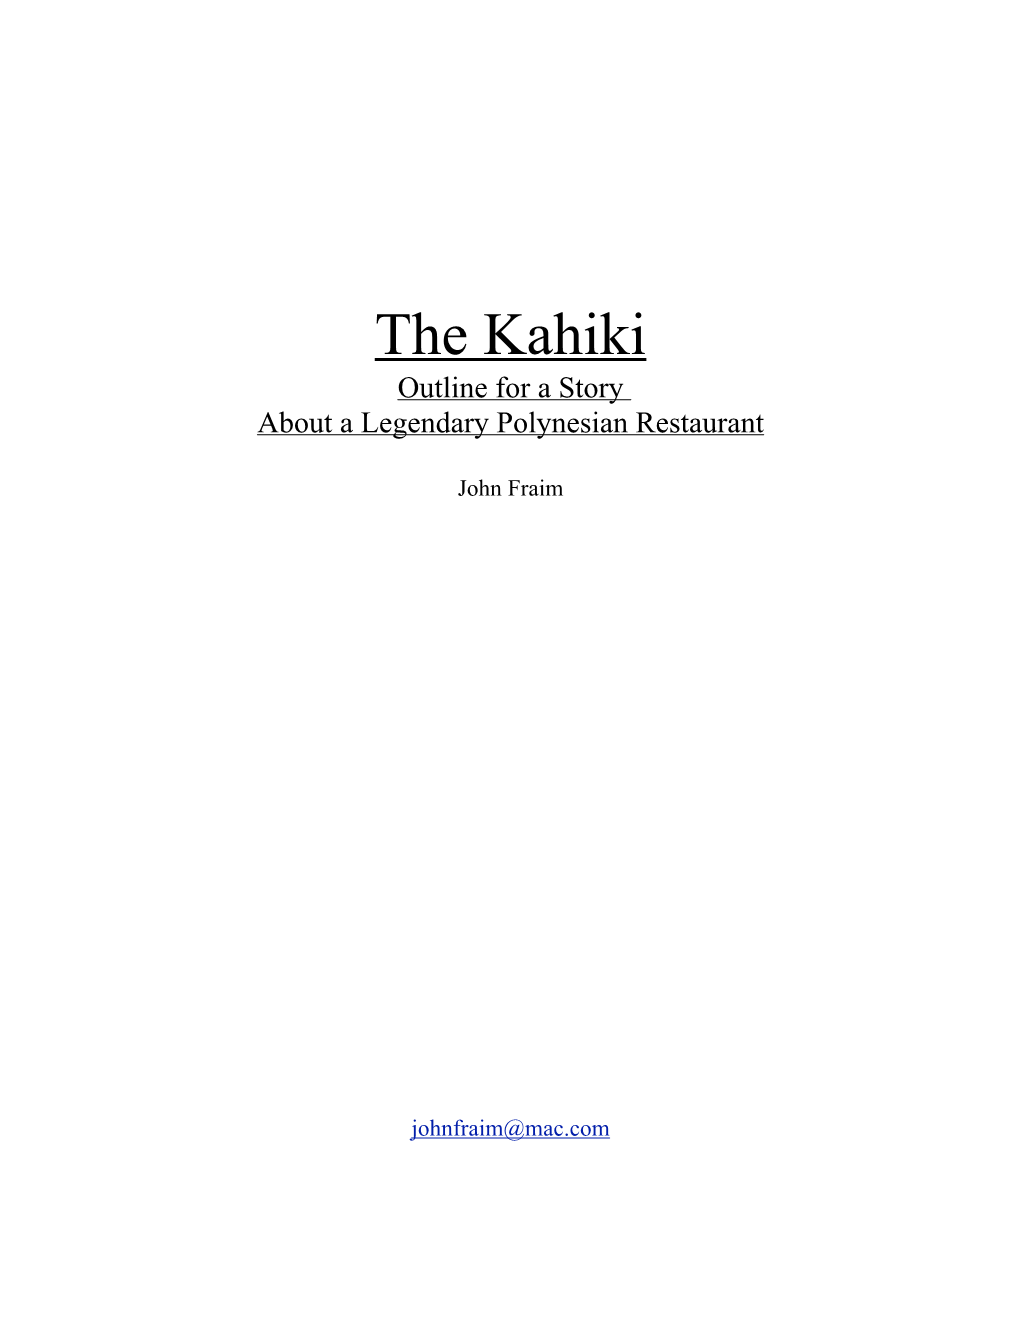 The Kahiki Outline for a Story About a Legendary Polynesian Restaurant